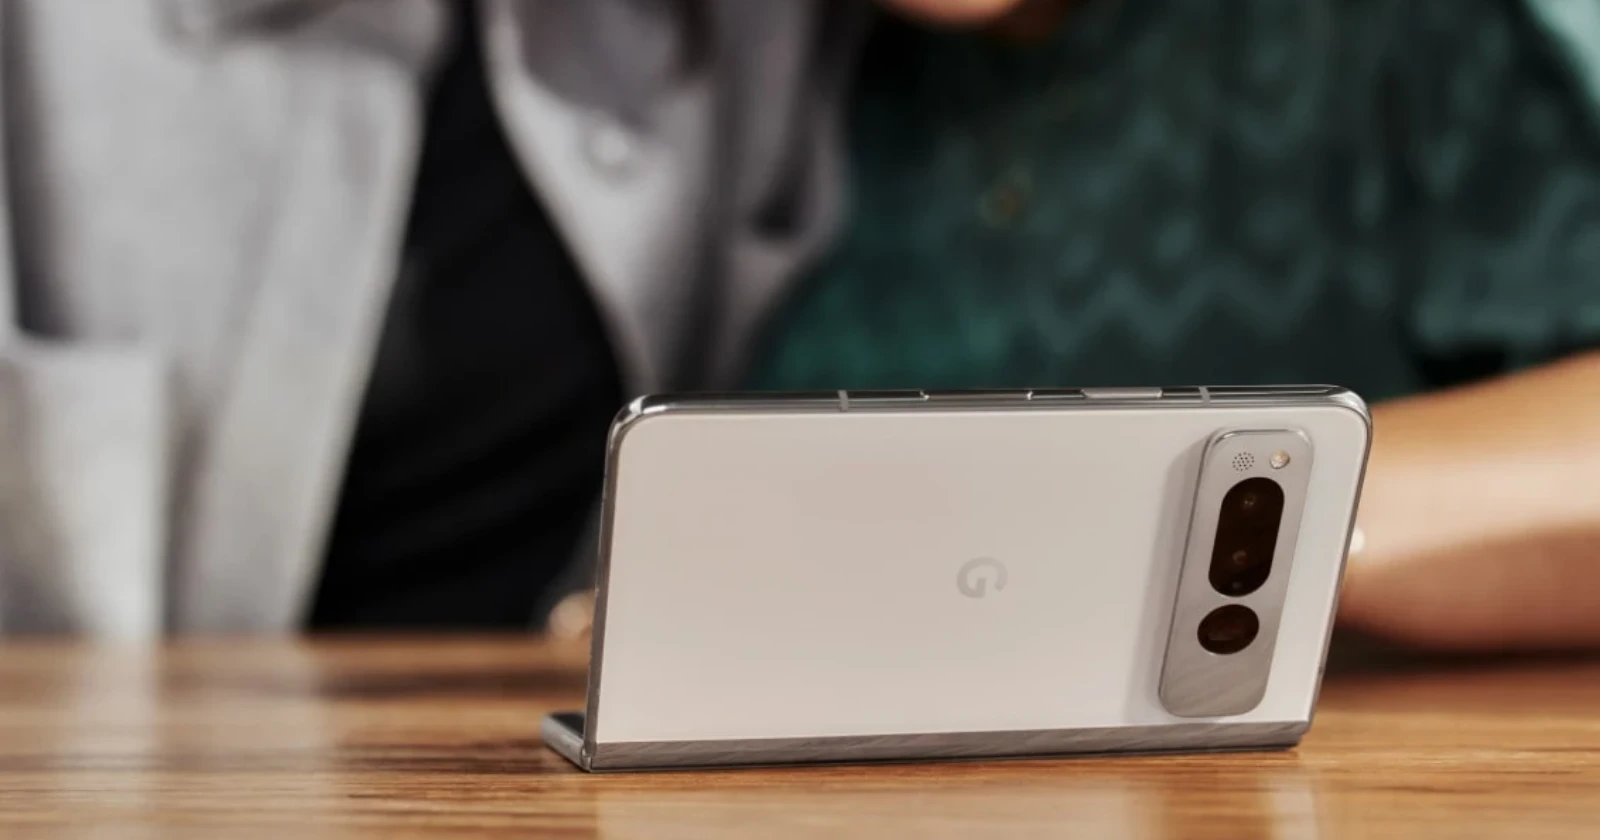 You can now use your Google Pixel as a webcam with Link to Windows